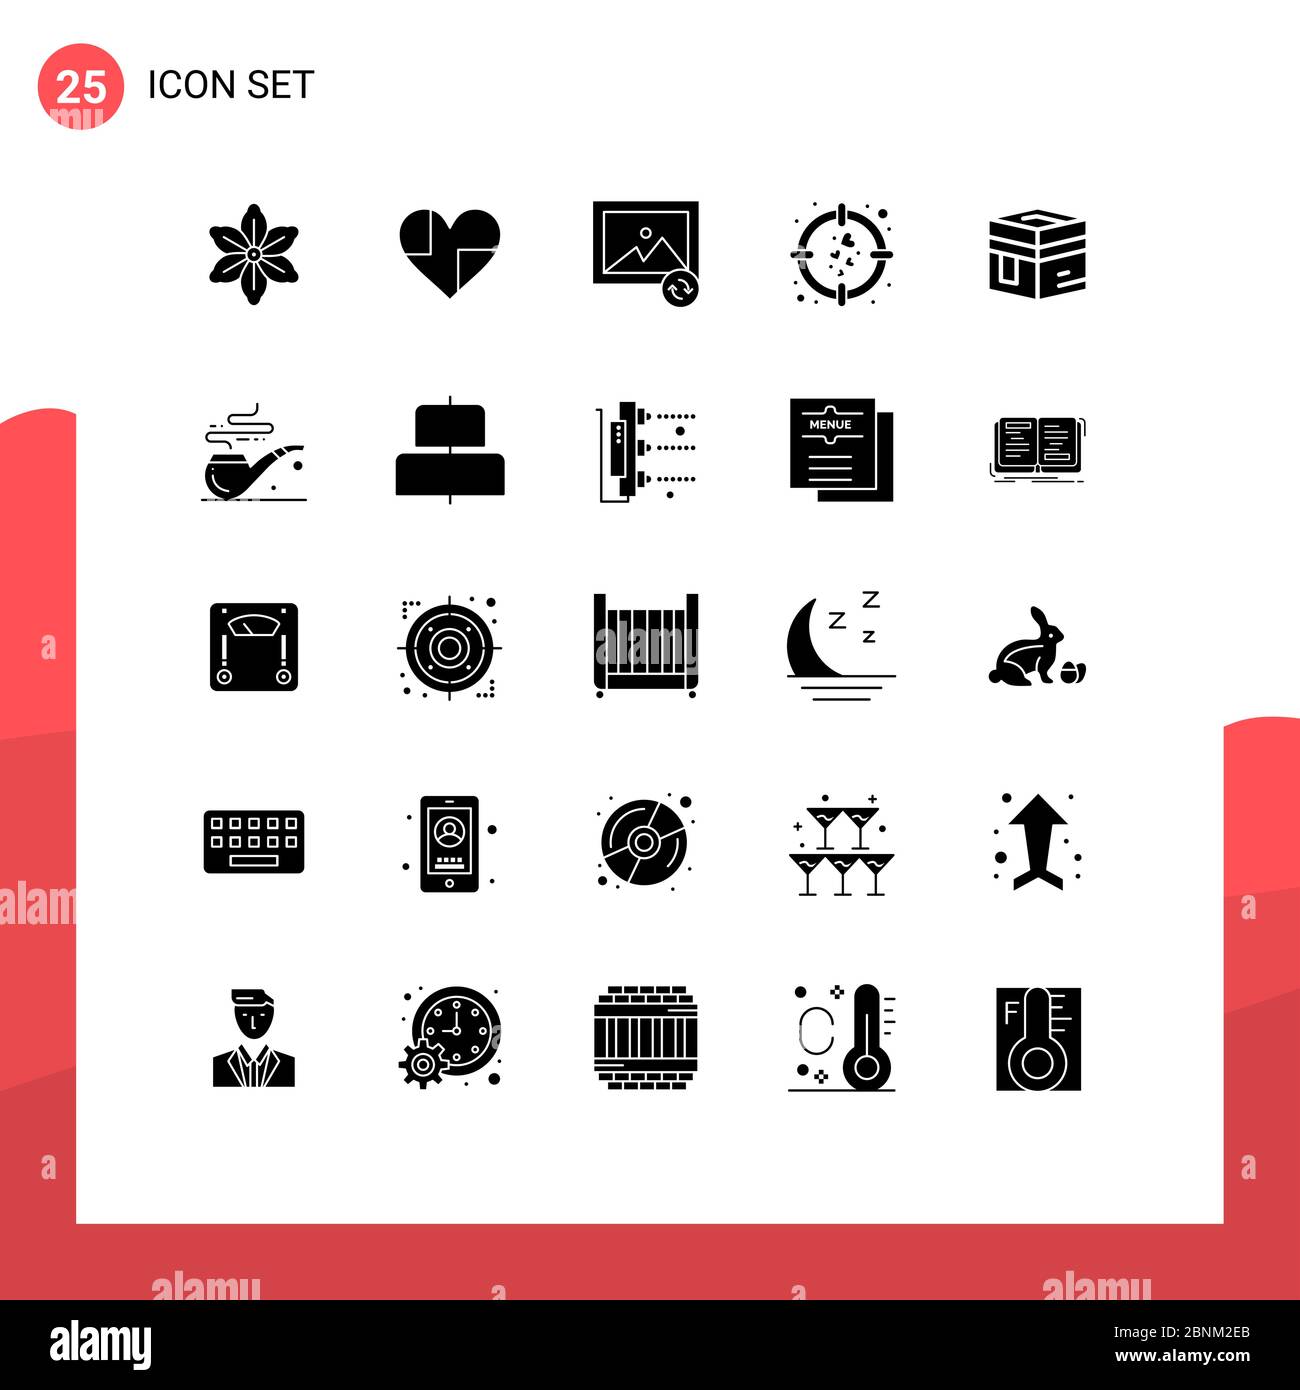 Pictogram Set of 25 Simple Solid Glyphs of holy, goal, chocolate, target, heart Editable Vector Design Elements Stock Vector